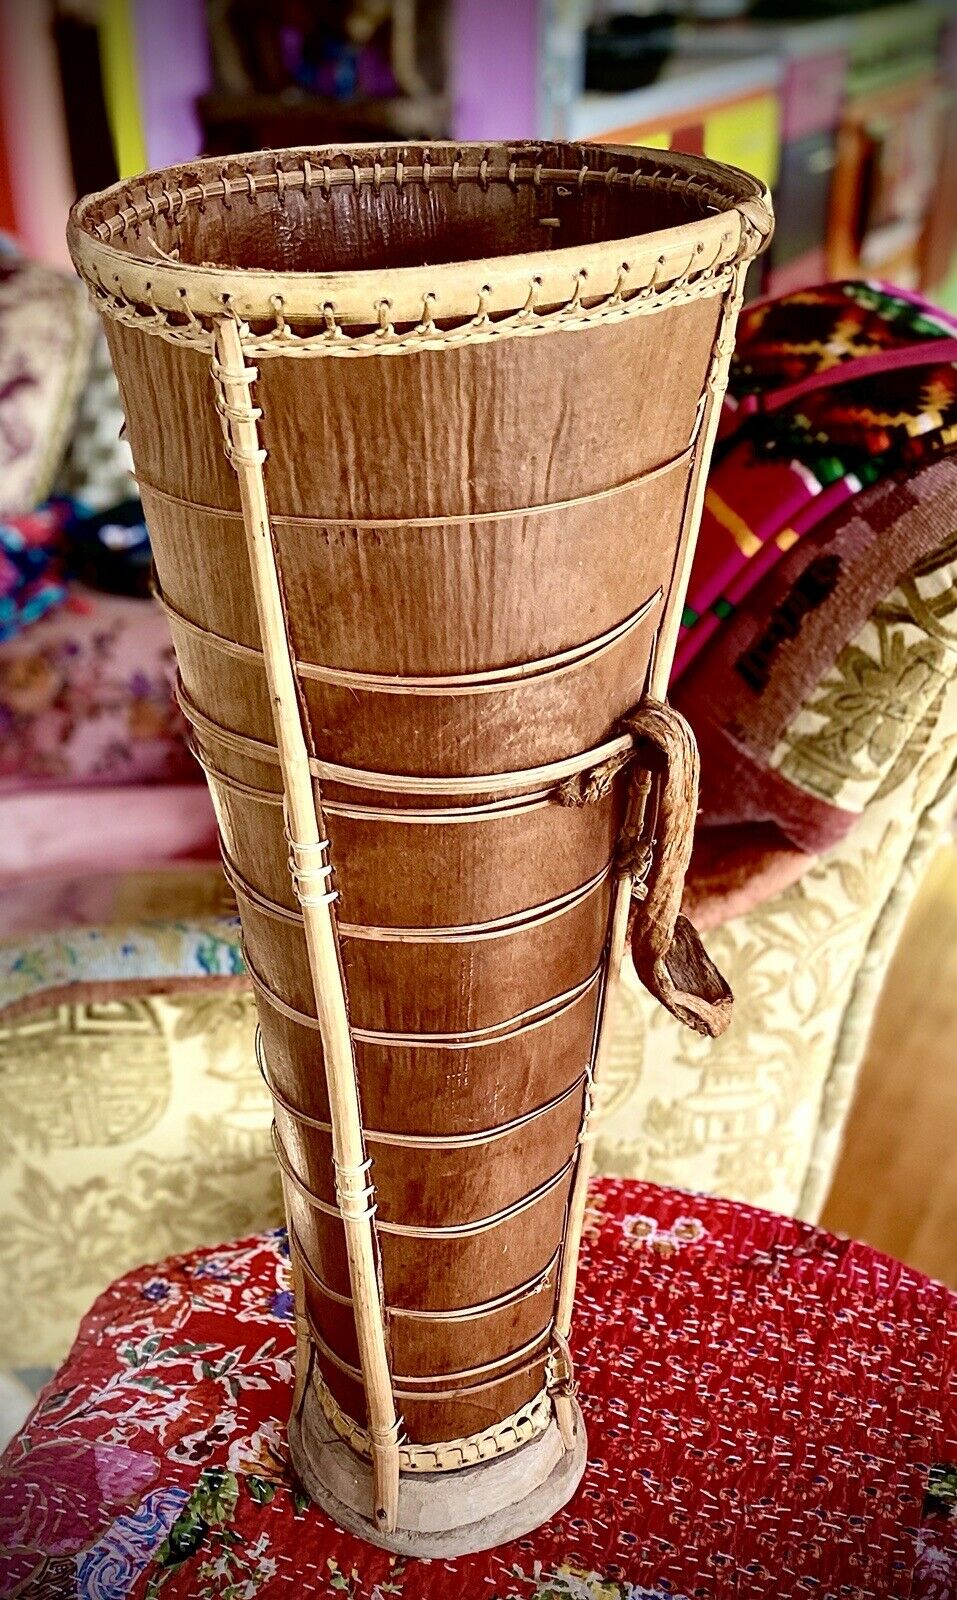 Malaysian Bidayuh Carrying Basket With Straps, Palm Leaves, Woven Rattan